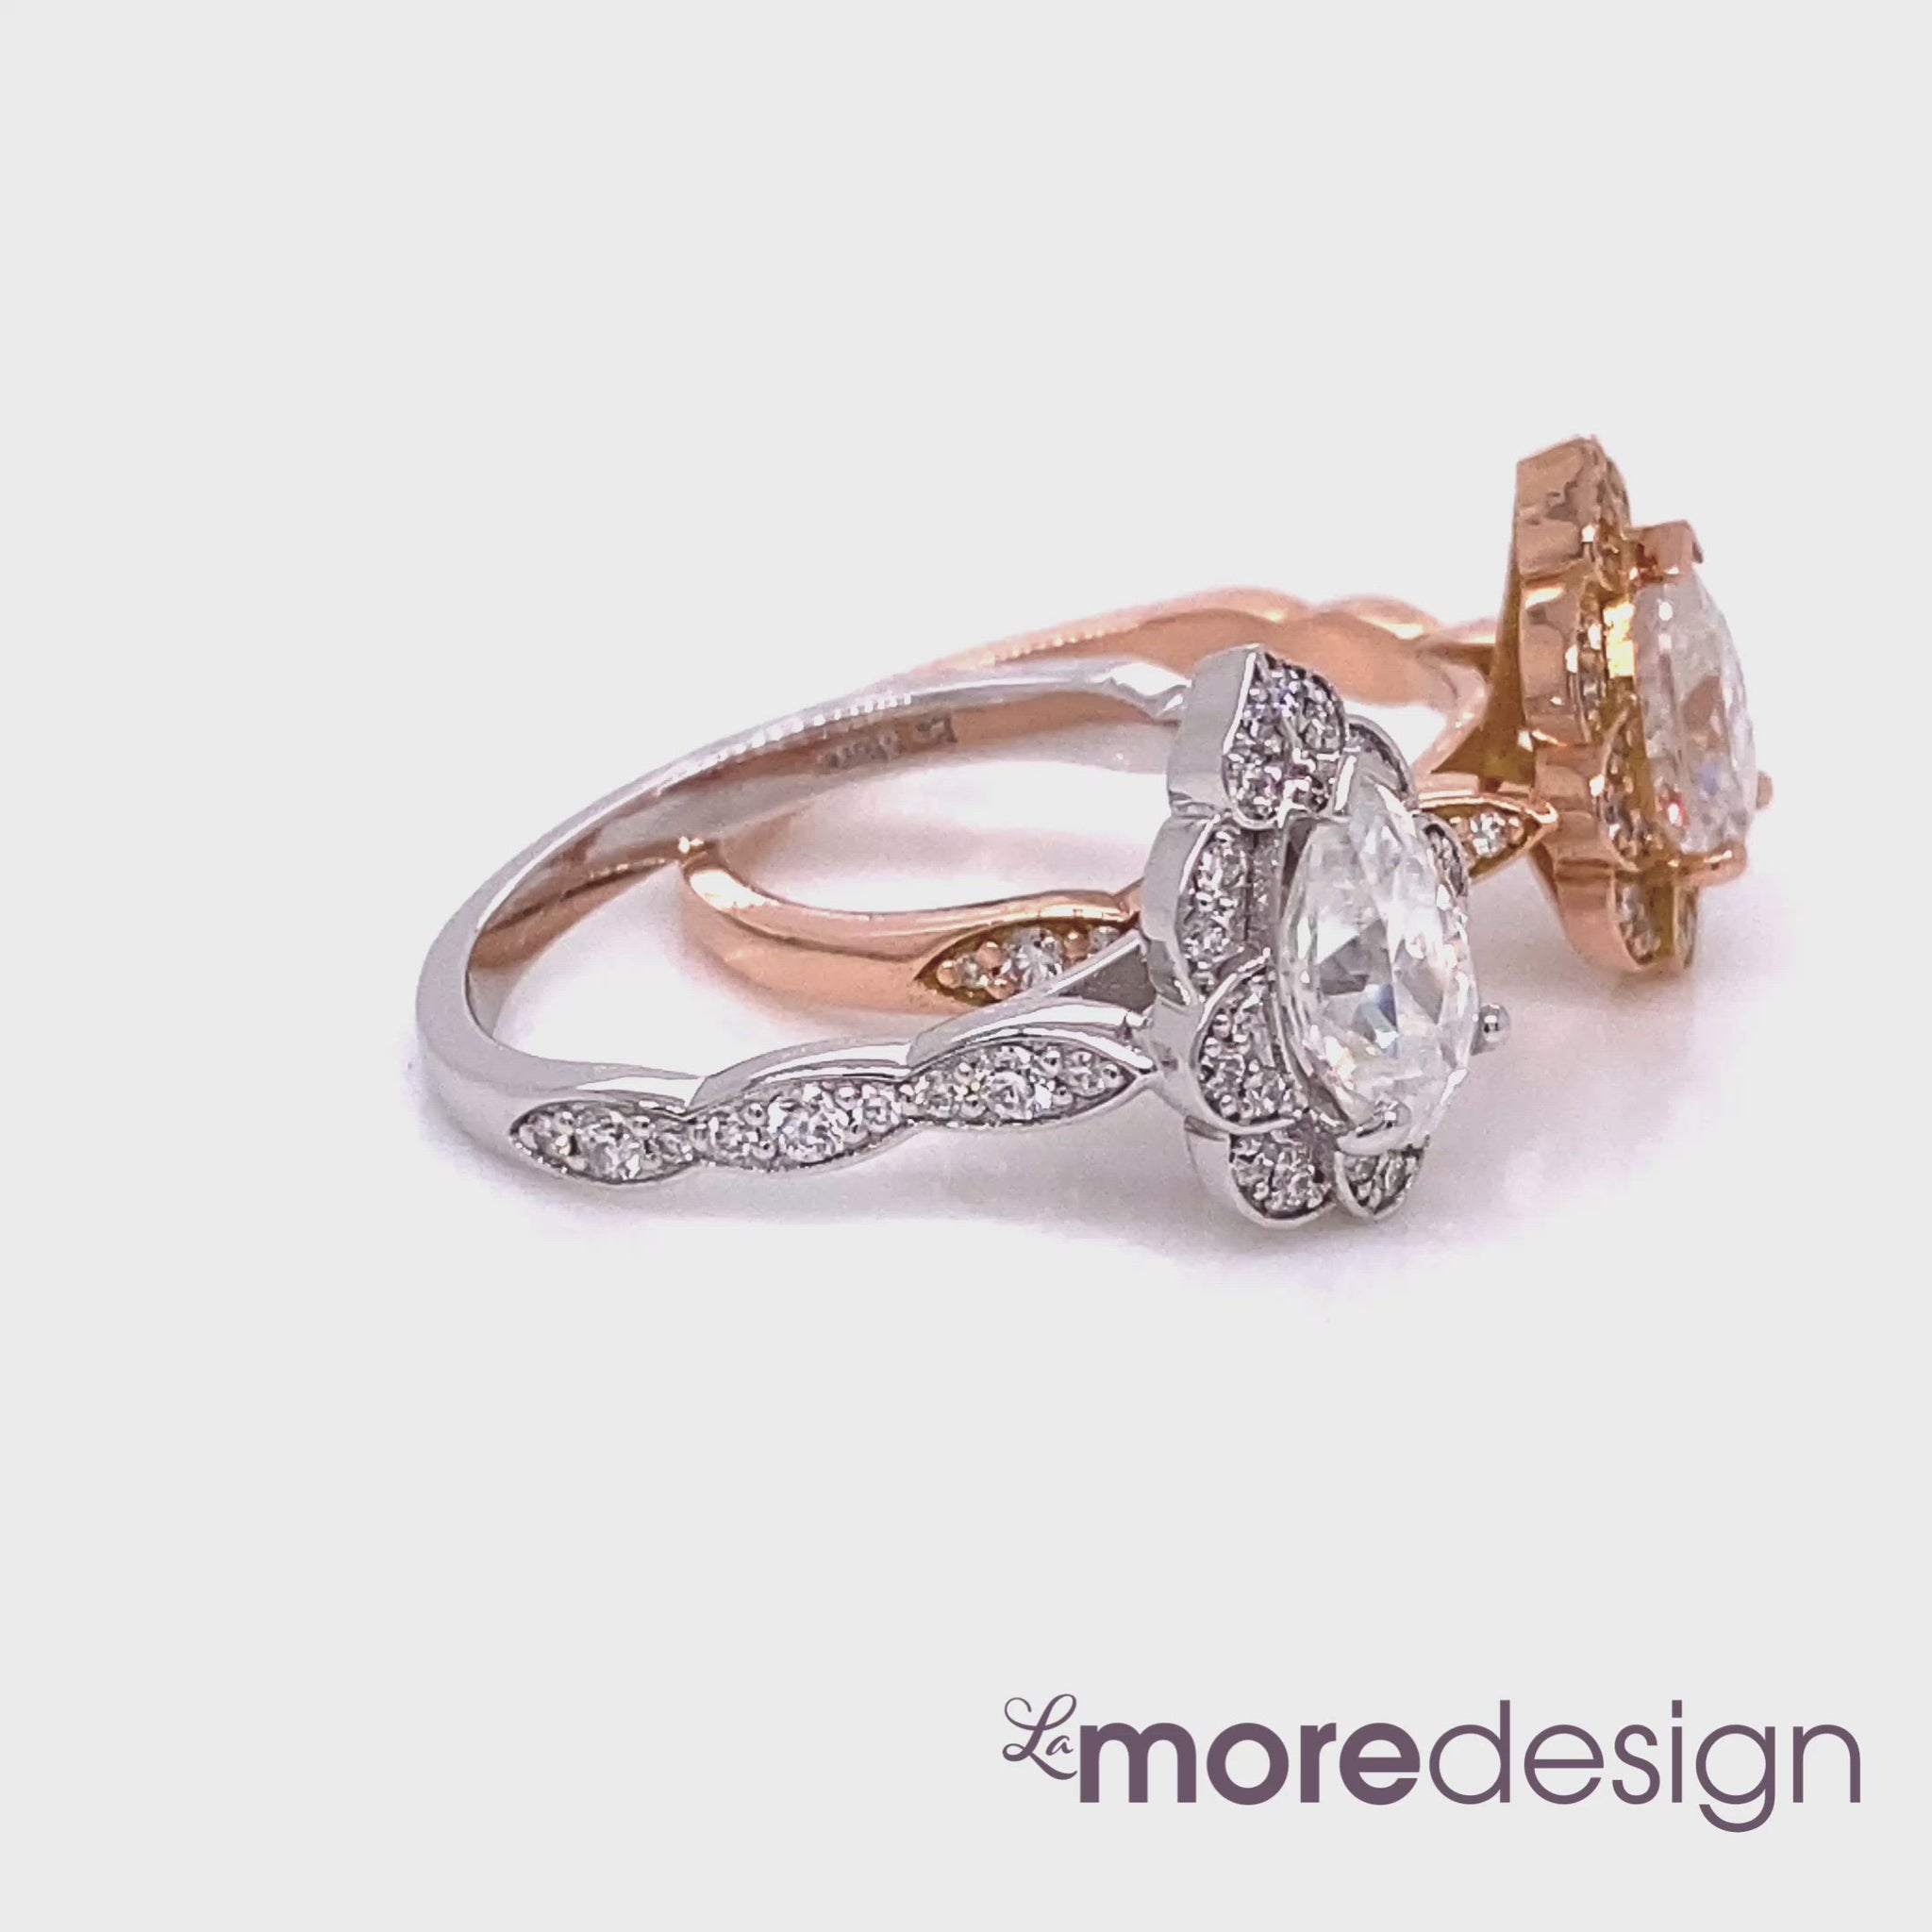 Vintage floral pear moissanite engagement ring rose gold and white gold diamond scalloped band by la more design jewelry